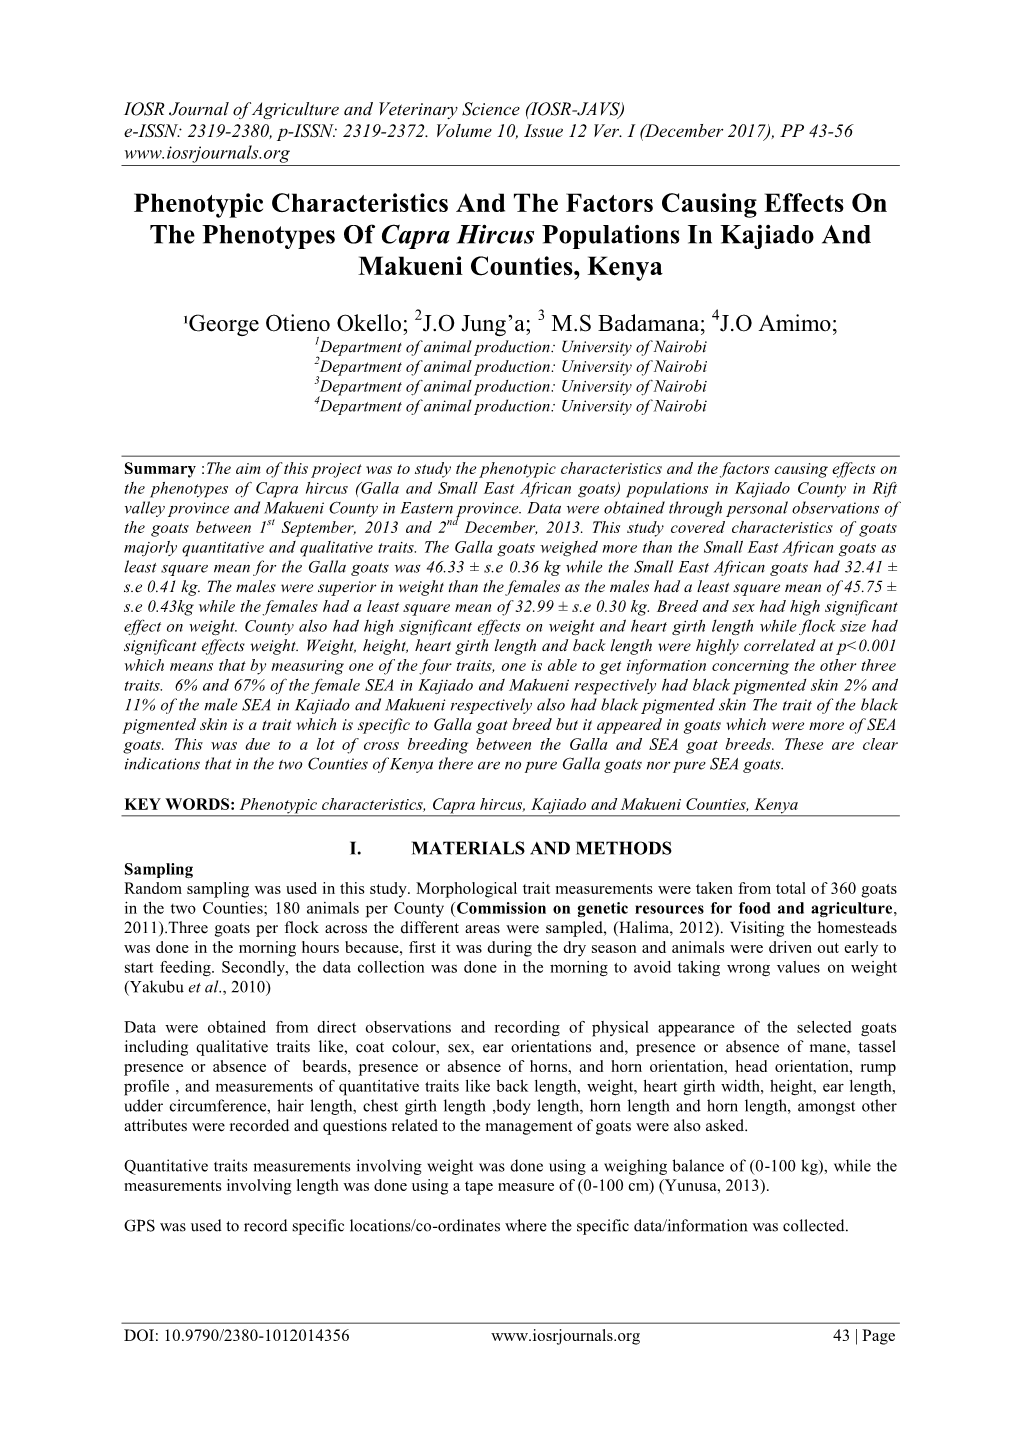 Phenotypic Characteristics and the Factors Causing Effects on the Phenotypes of Capra Hircus Populations in Kajiado and Makueni Counties, Kenya